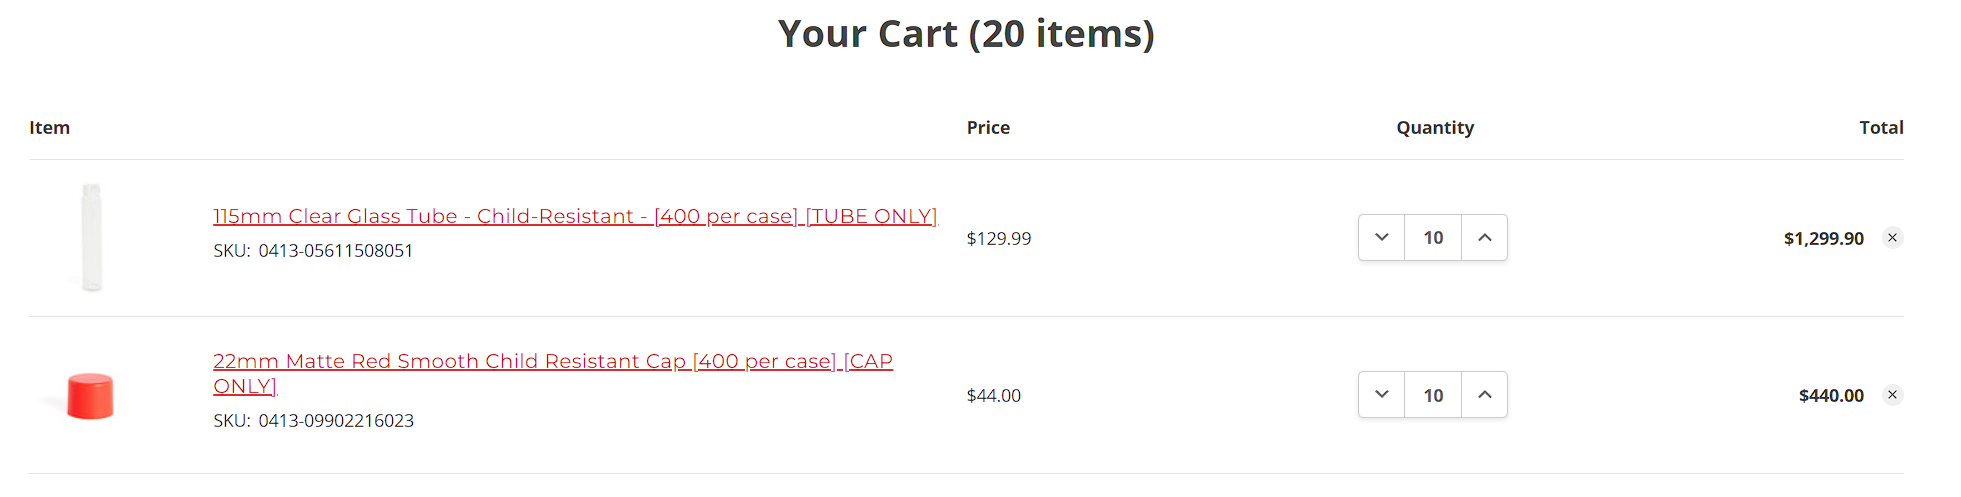 Products added on cart page